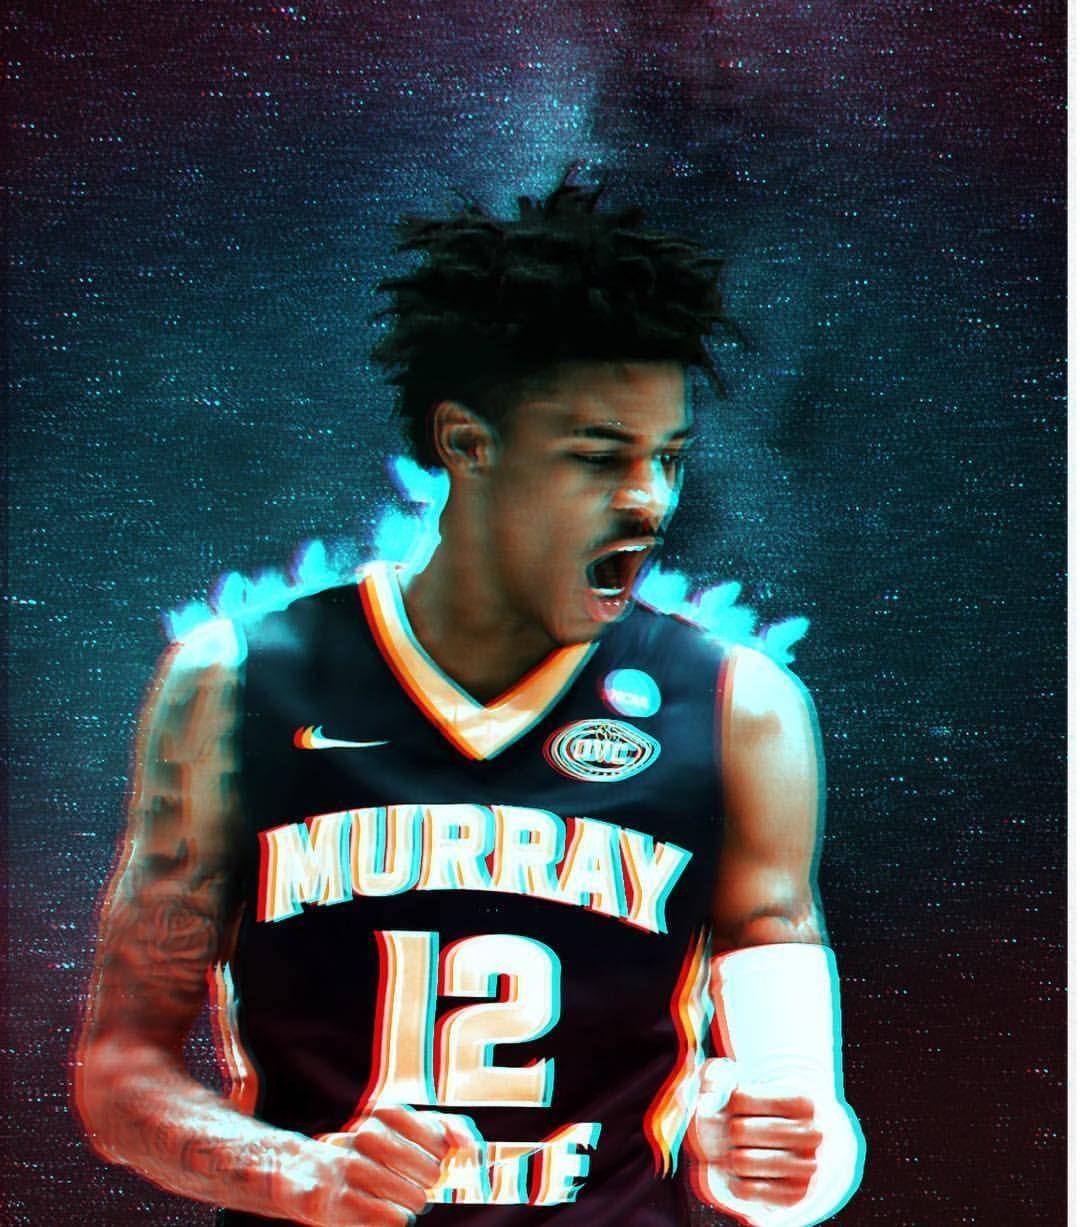 A basketball player is shown in an artistic way - Ja Morant